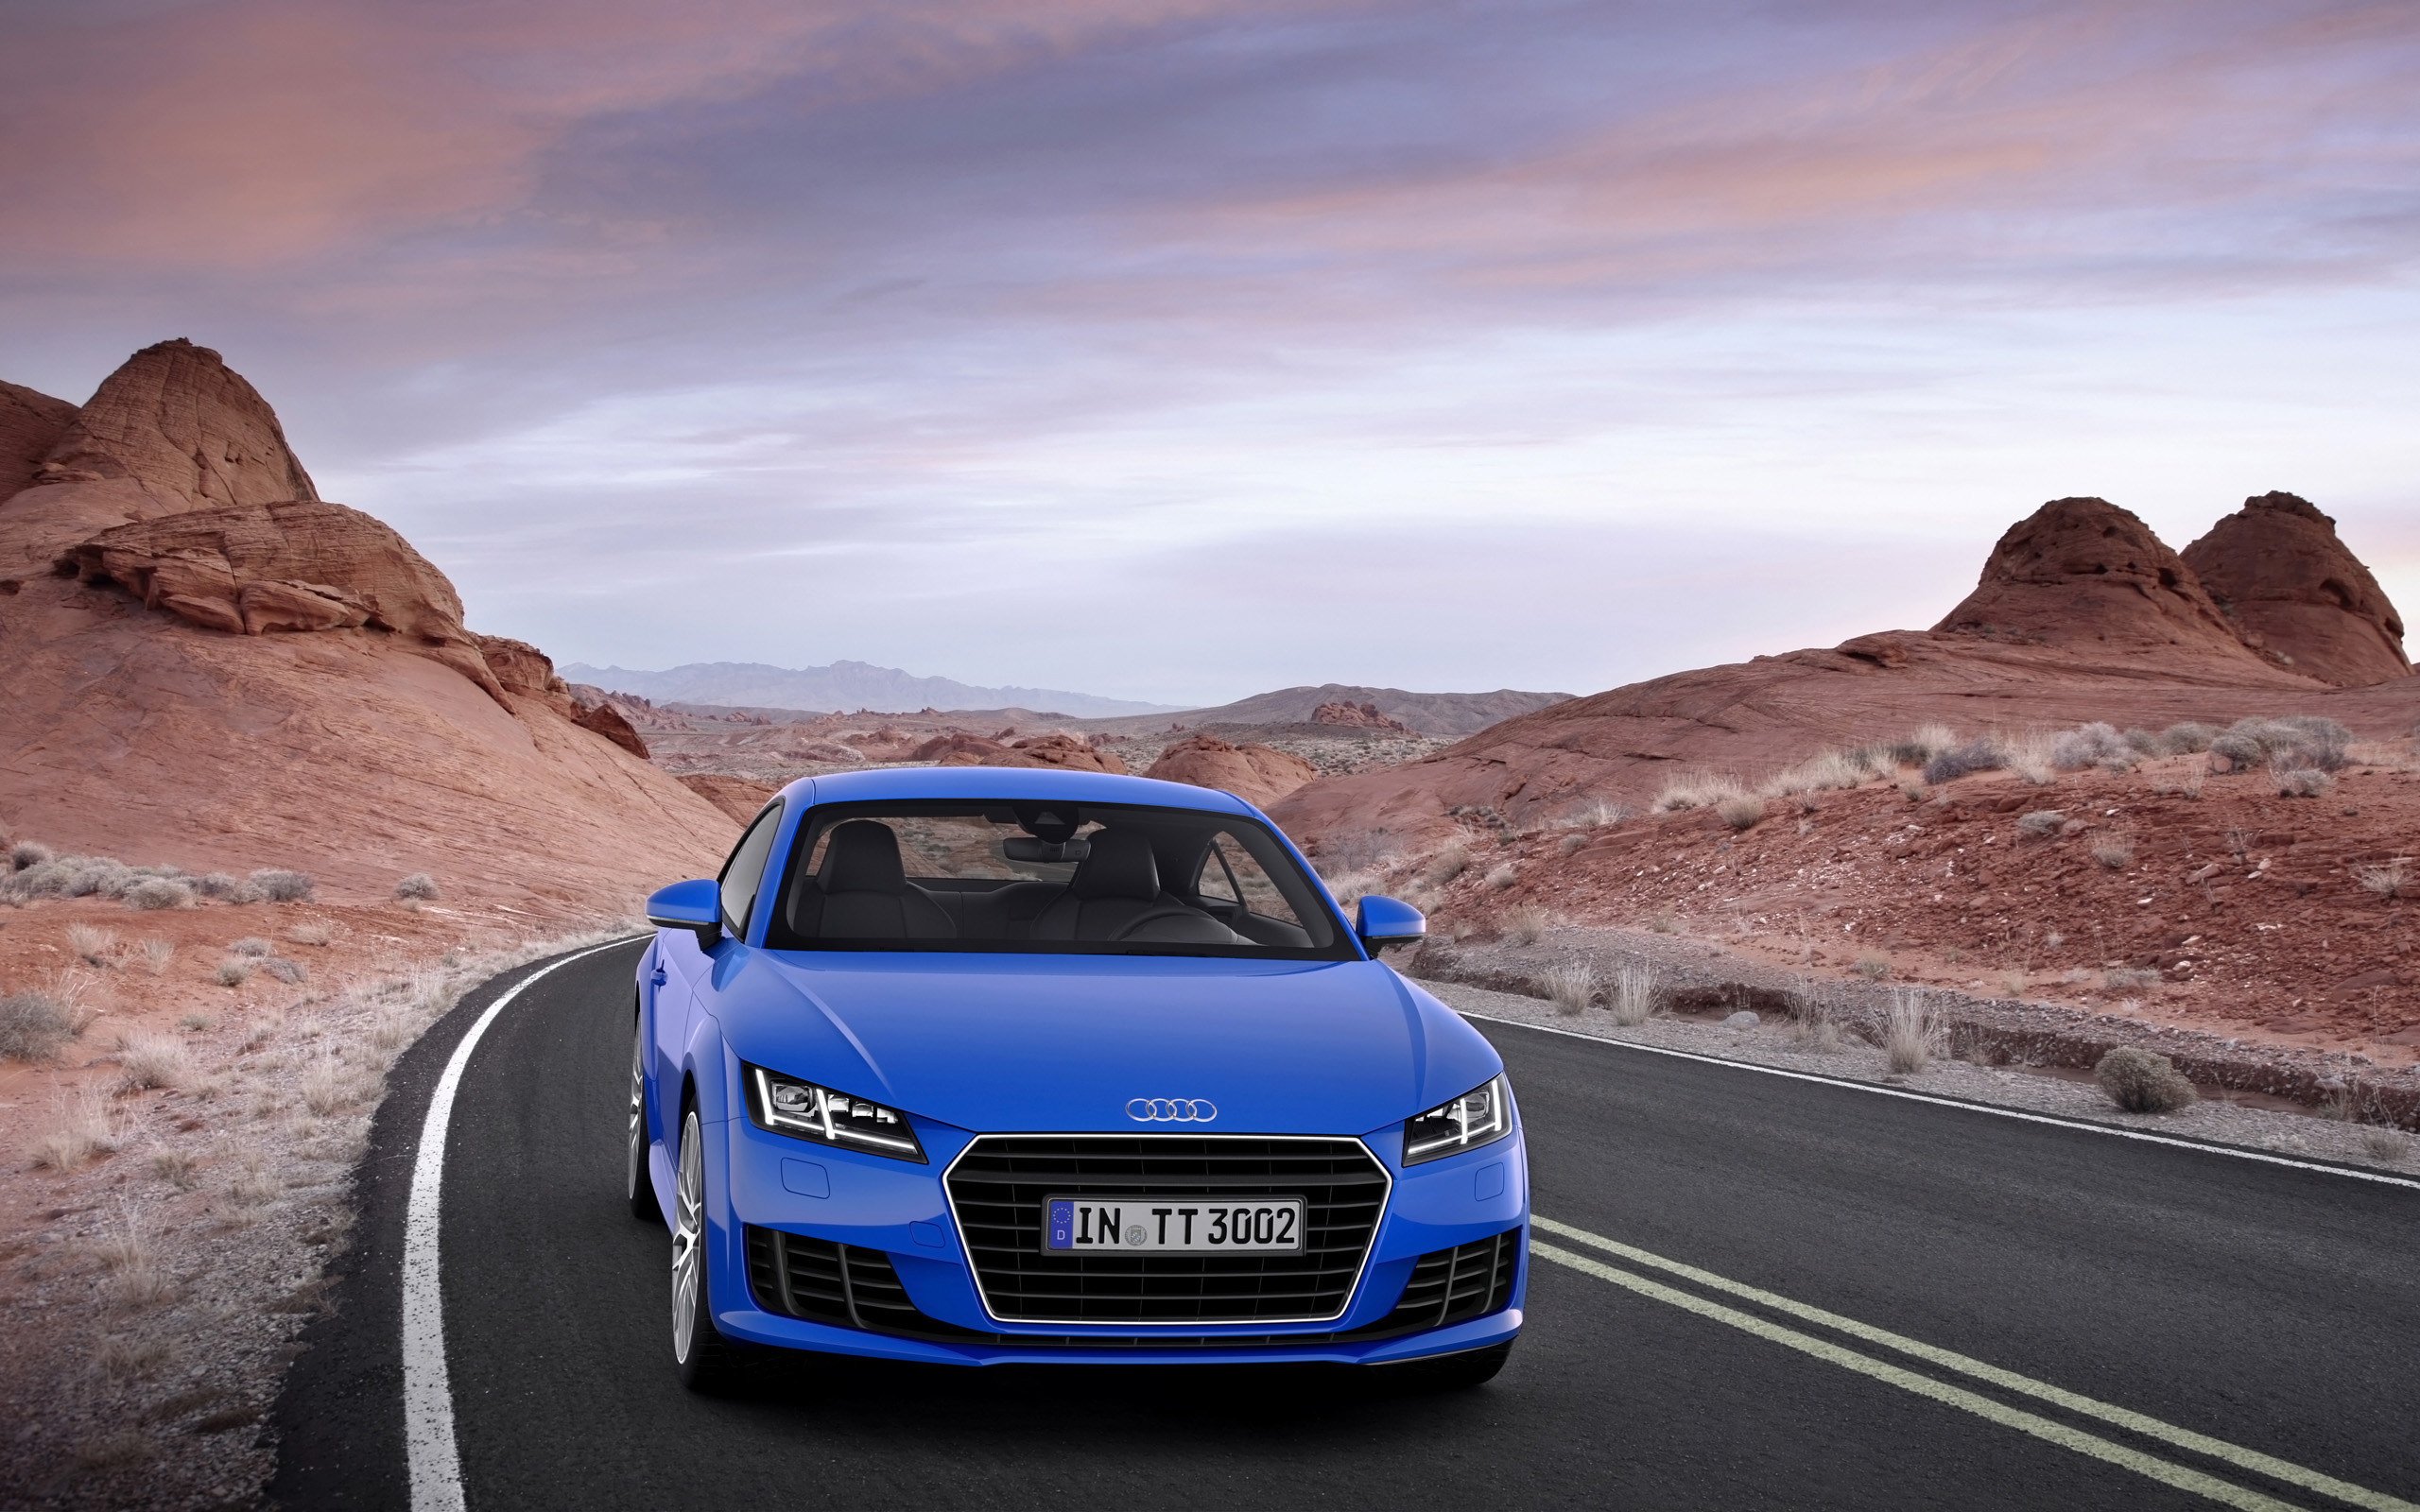 Awesome Audi TT Wallpaper Full HD Pictures